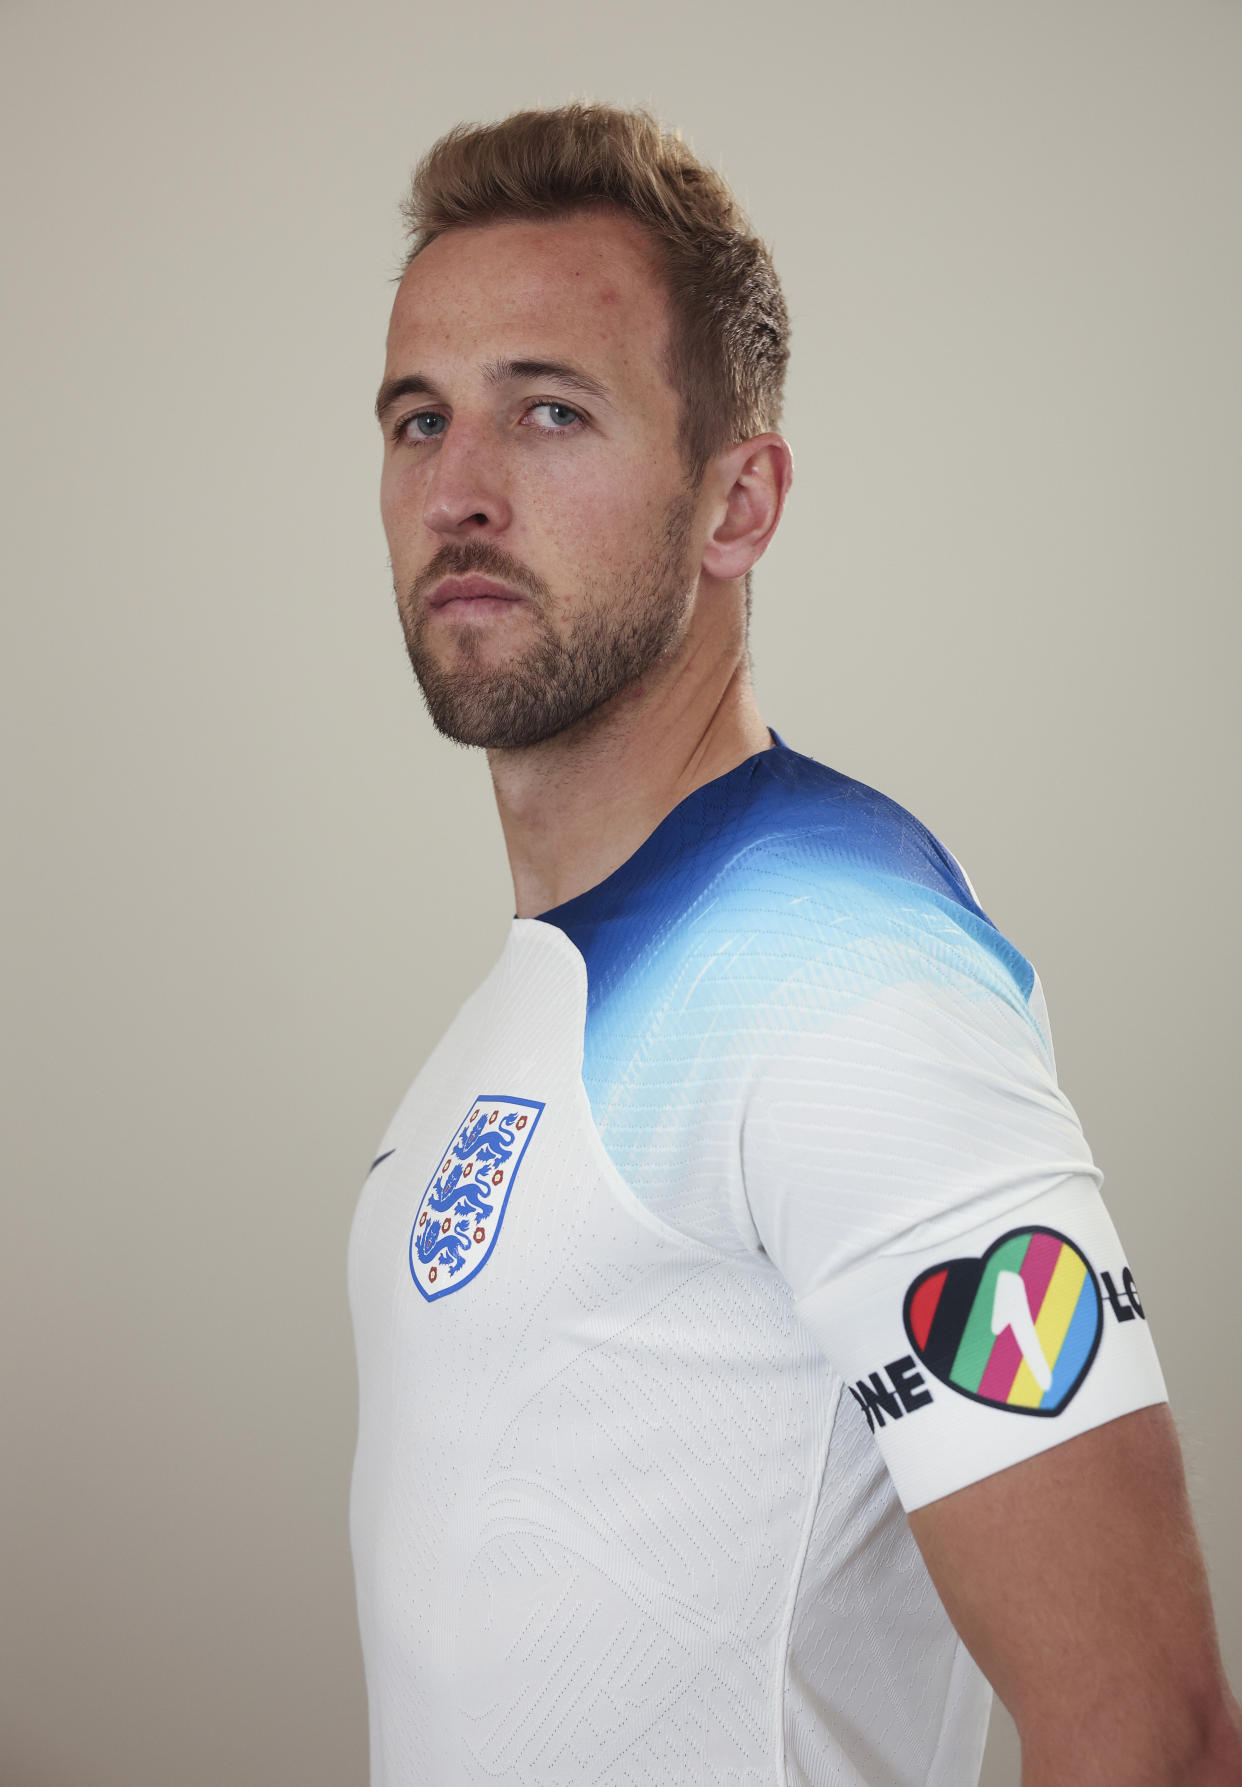 BURTON UPON TRENT, ENGLAND - SEPTEMBER 20: Harry Kane of England wears the OneLove armband, as the England team stands together with 9 other European countries to support season-long campaign for inclusion and against discrimination at St George's Park on September 20, 2022 in Burton upon Trent, England. (Photo by Eddie Keogh - The FA/The FA via Getty Images)